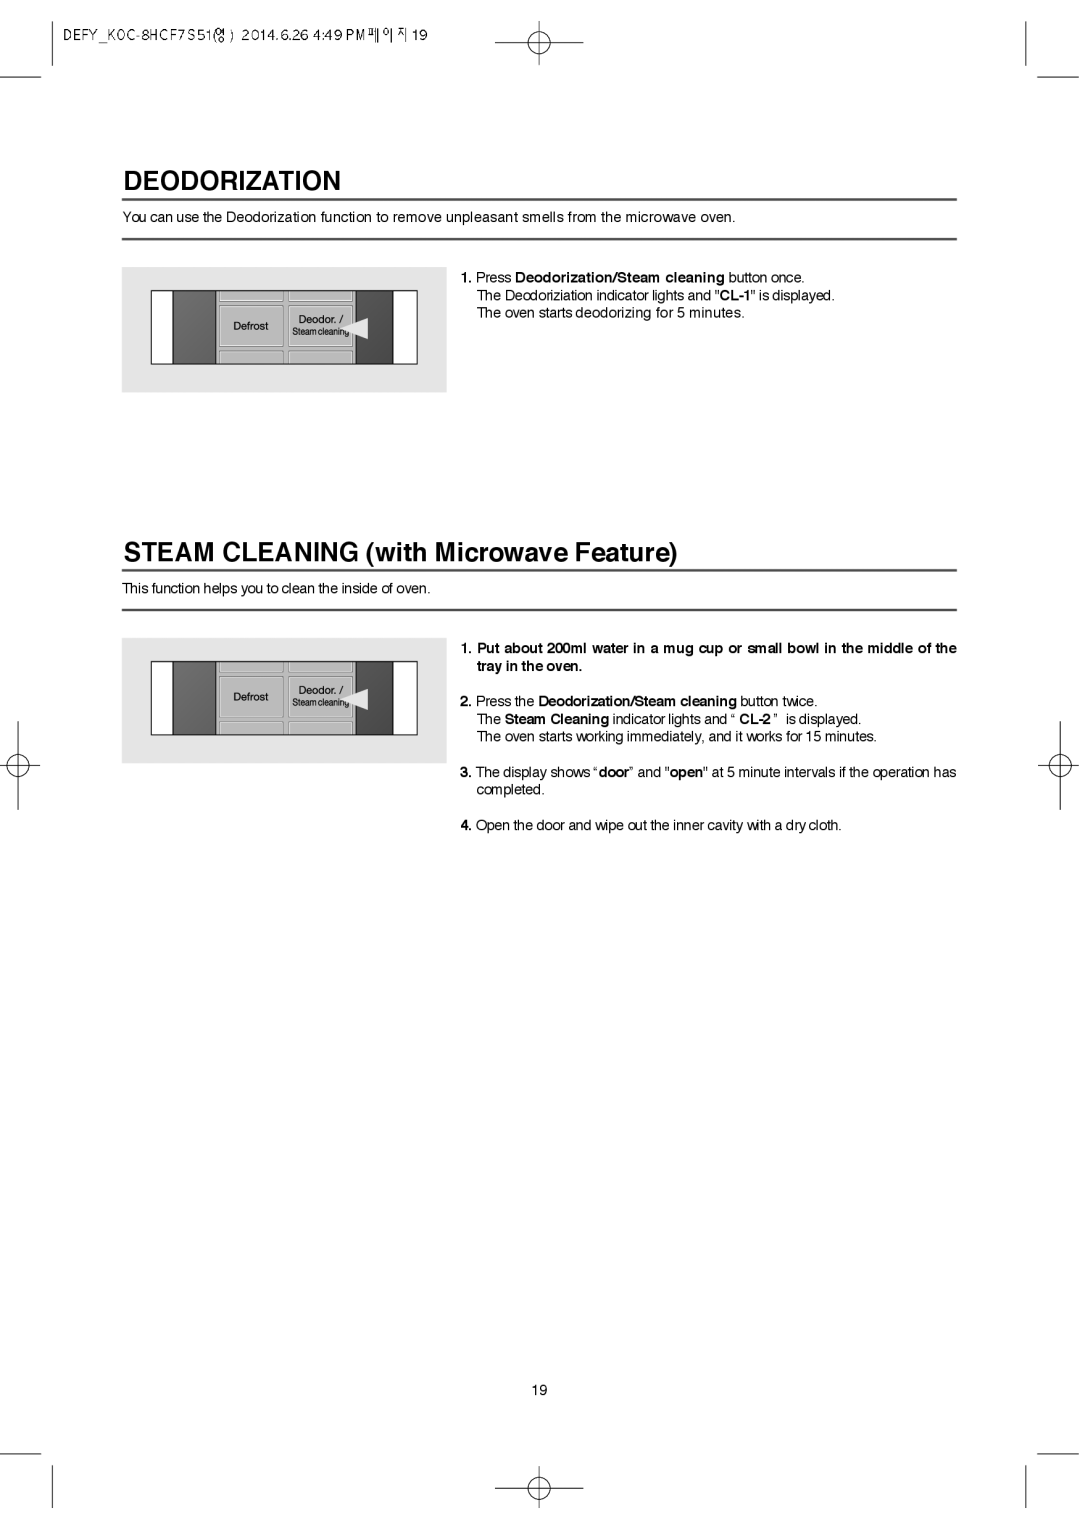 Defy Appliances MWA 2434 MM user manual Deodorization, STEAM CLEANING with Microwave Feature 